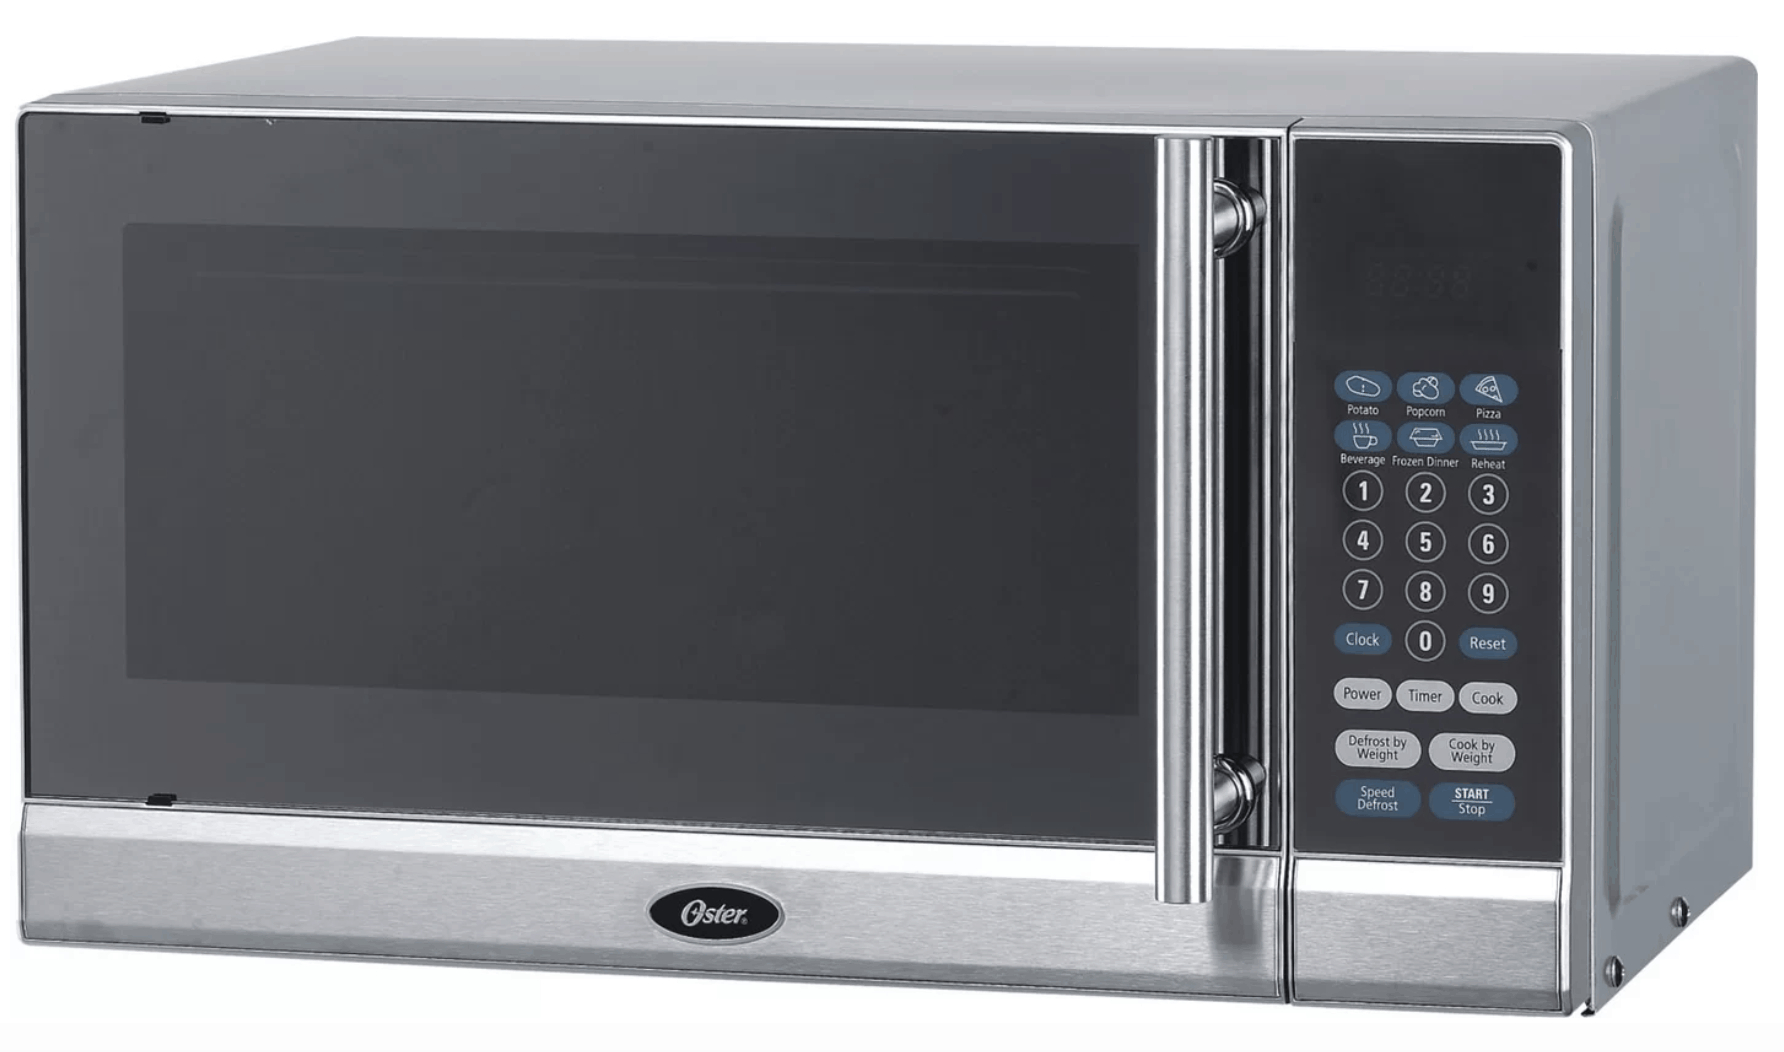 0.7 Cu. Ft. 700W Countertop Microwave in Silver